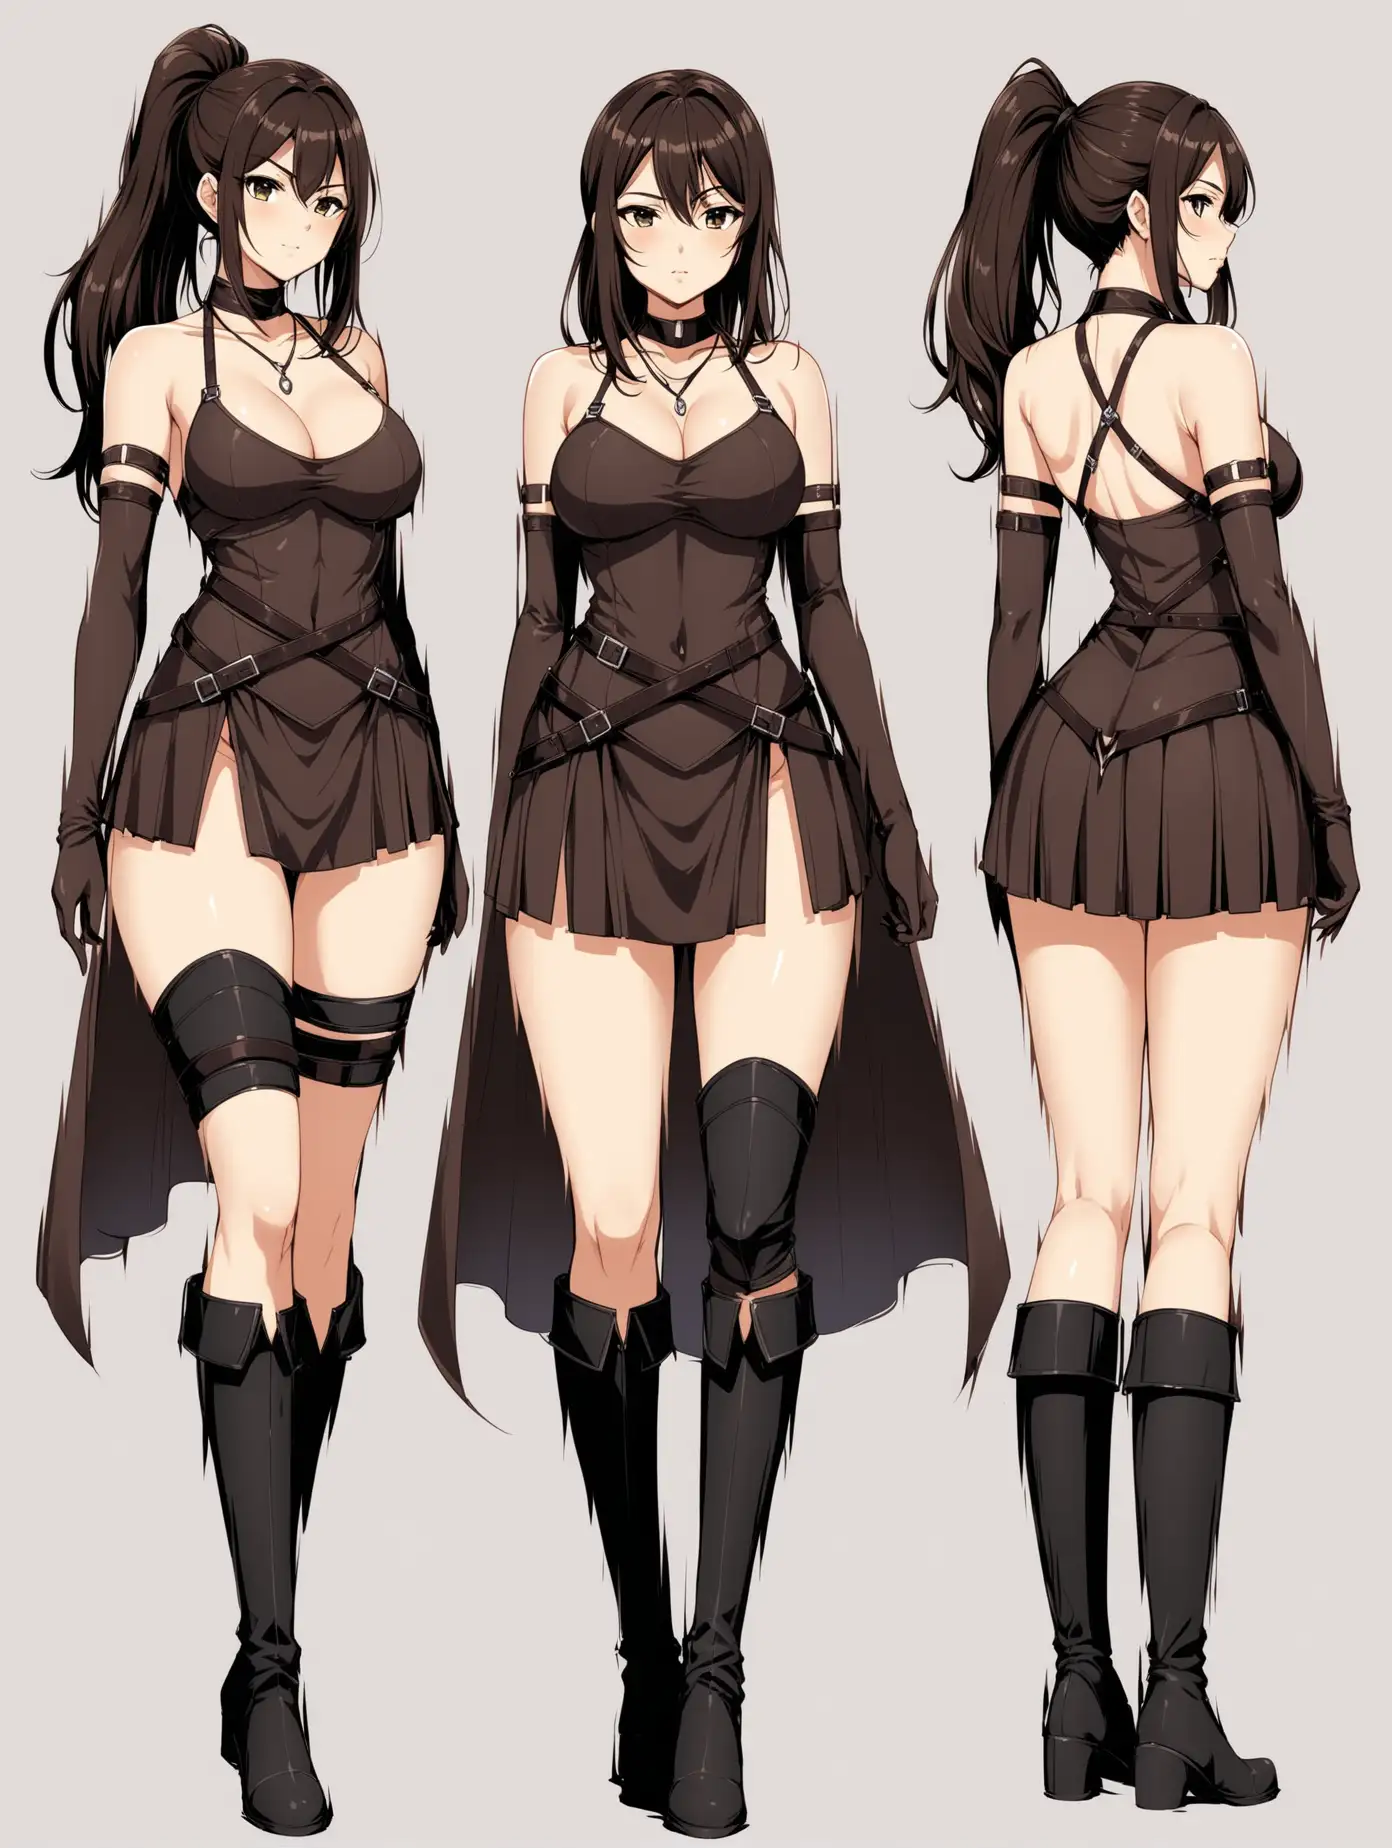 Full body picture of a sensual anime girl, age 25, long body height, breasts size D, large hips, wavy brunette hair, bangs, medium hair length, ponytail, huntress outfit, open 2 sides skirt, knee high boots, one side leg band, necklaces, long elbow gloves, 2 poses with front and rear view